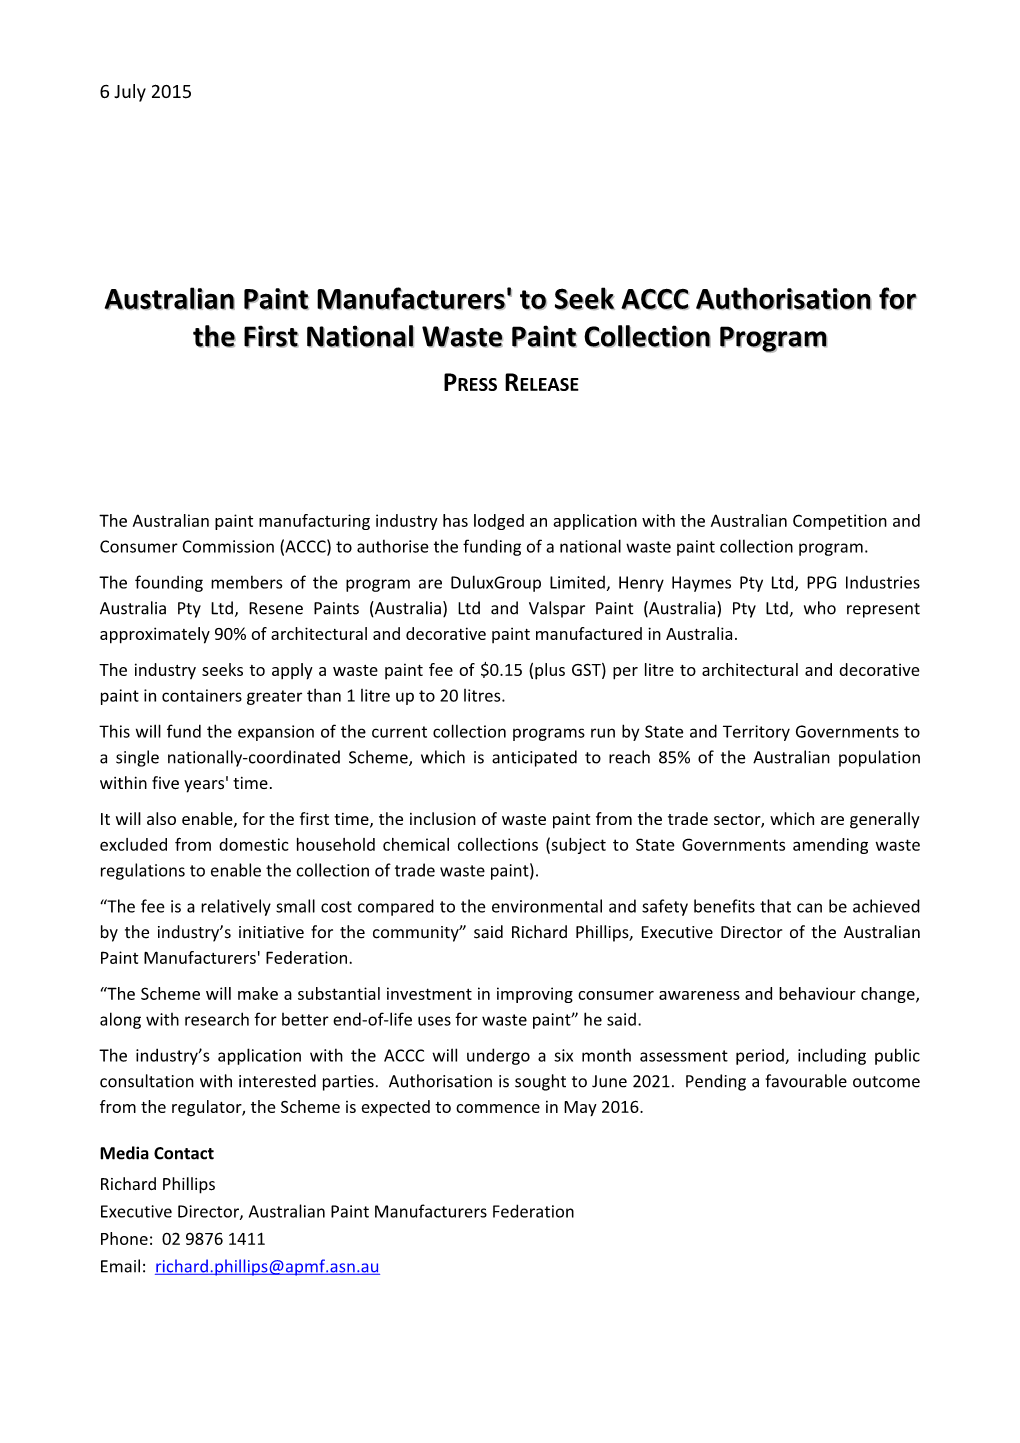 Australian Paint Manufacturers' to Seek ACCC Authorisation for the First National Waste